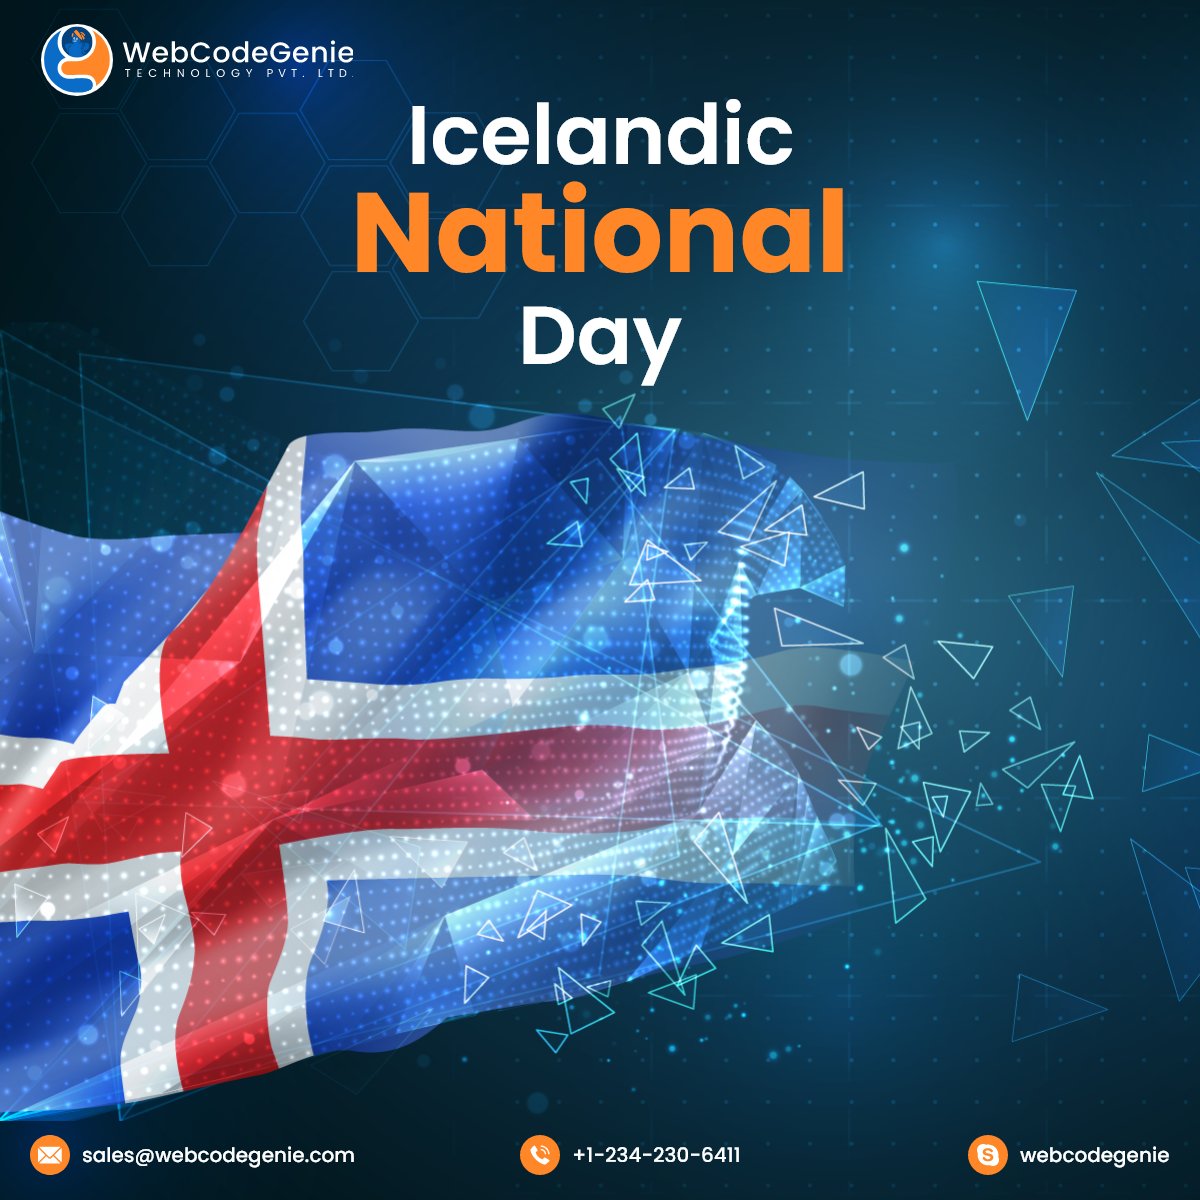 Wishing all Icelanders a day filled with pride, joy, and unity.

#IcelandicNationalDay #iceland #icelandic #nationalday